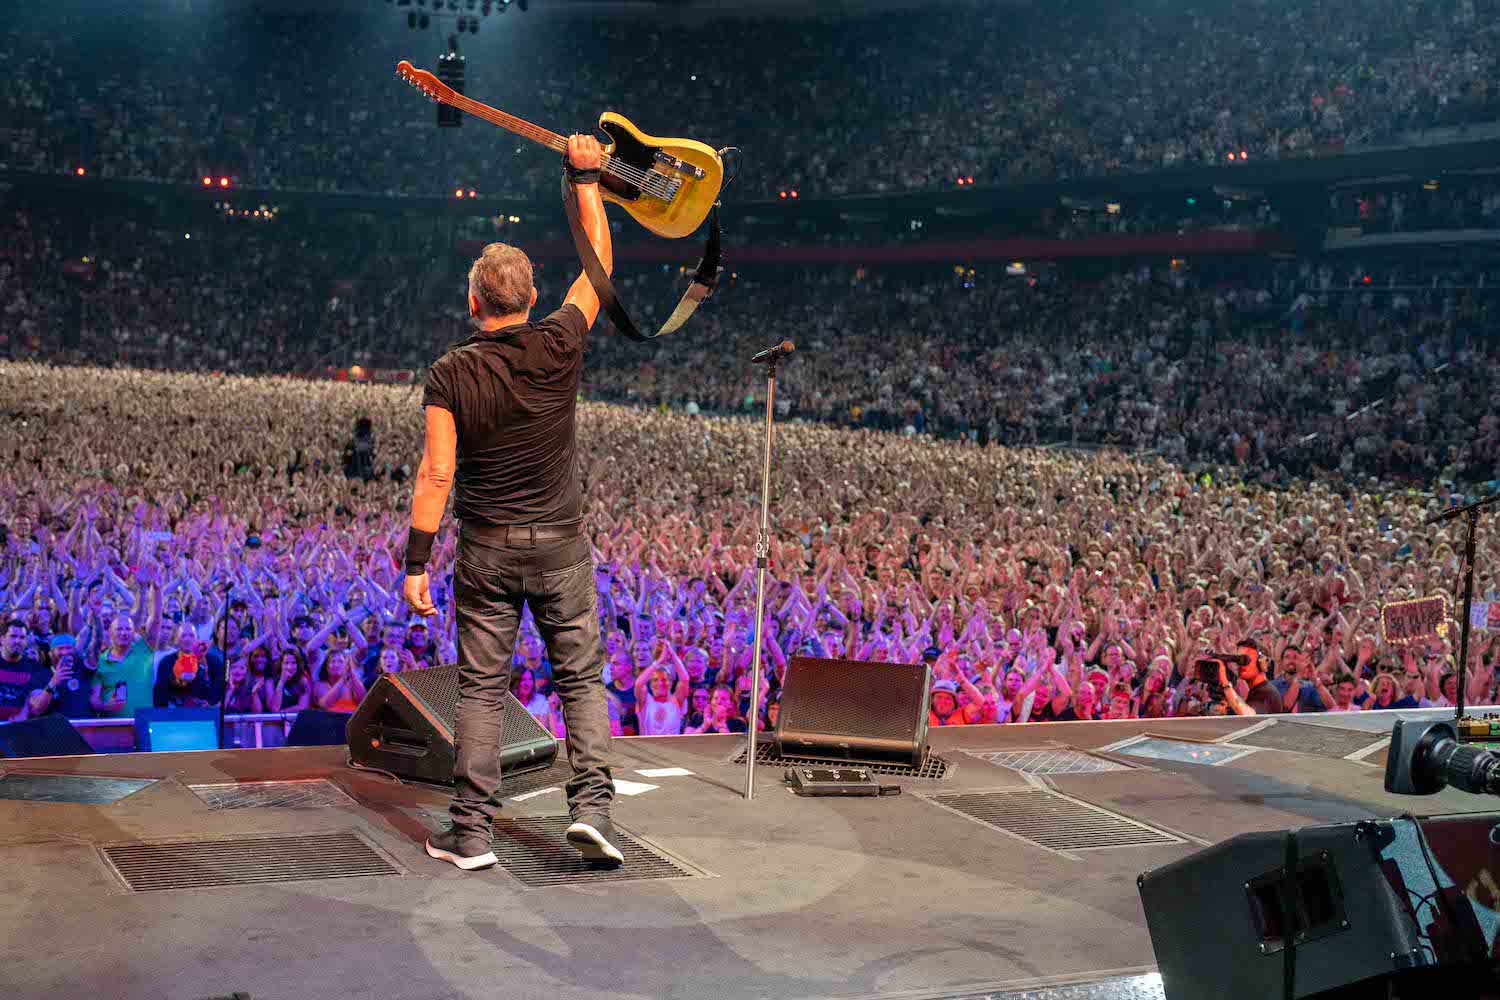 Bruce Springsteen & E Street Band at Johan Cruijff ArenA, Amsterdam, The Netherlands on May 27, 2023.